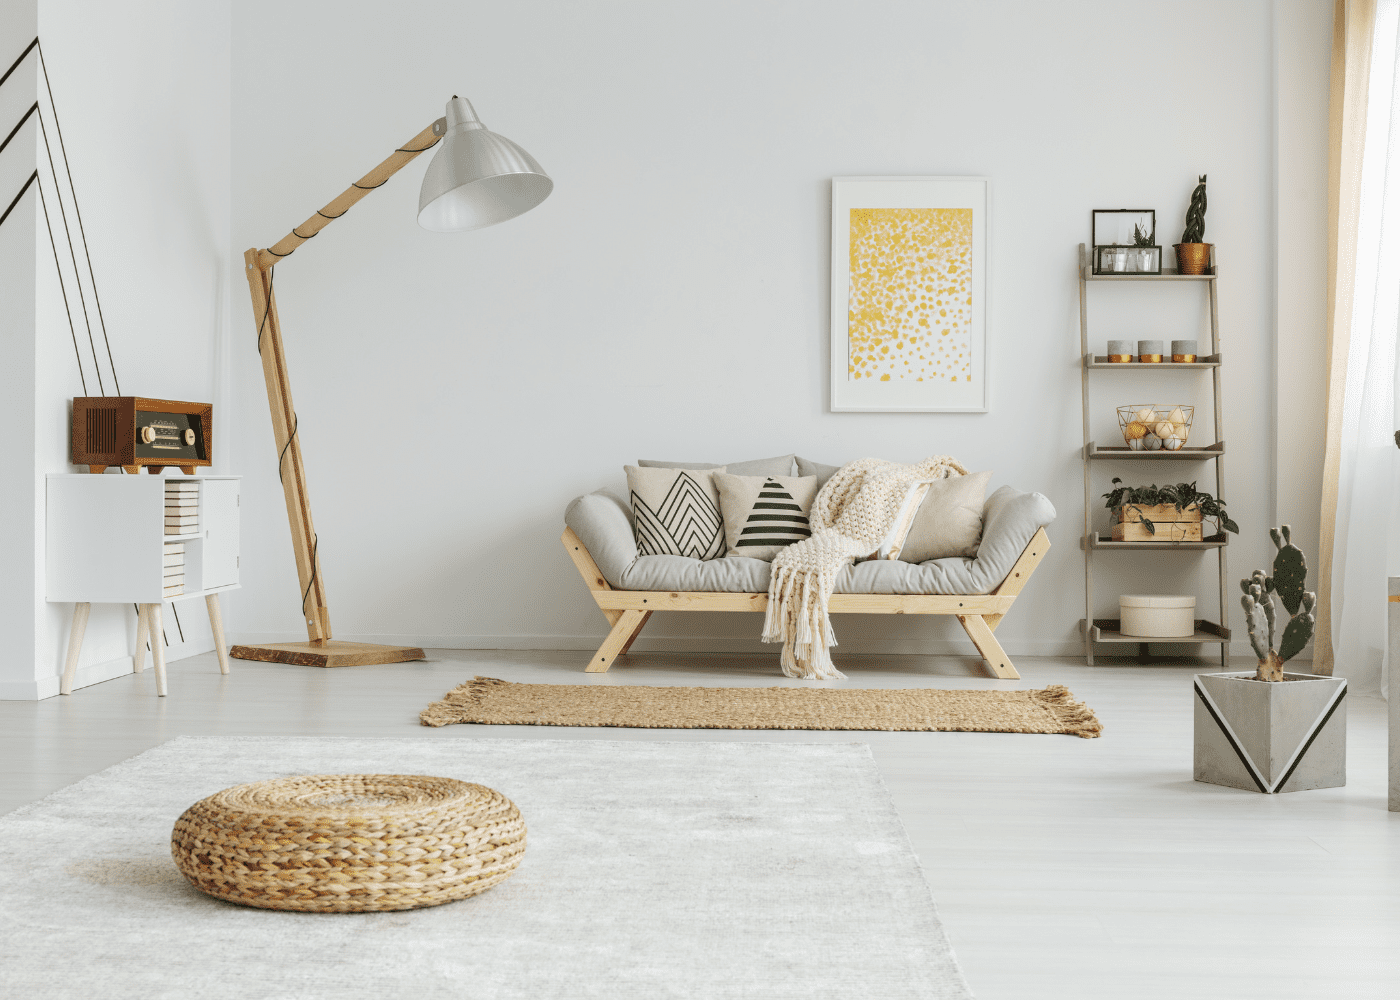 How to flatten a rug? A photo of a living room decorated in neutral colors with a rattan rug.